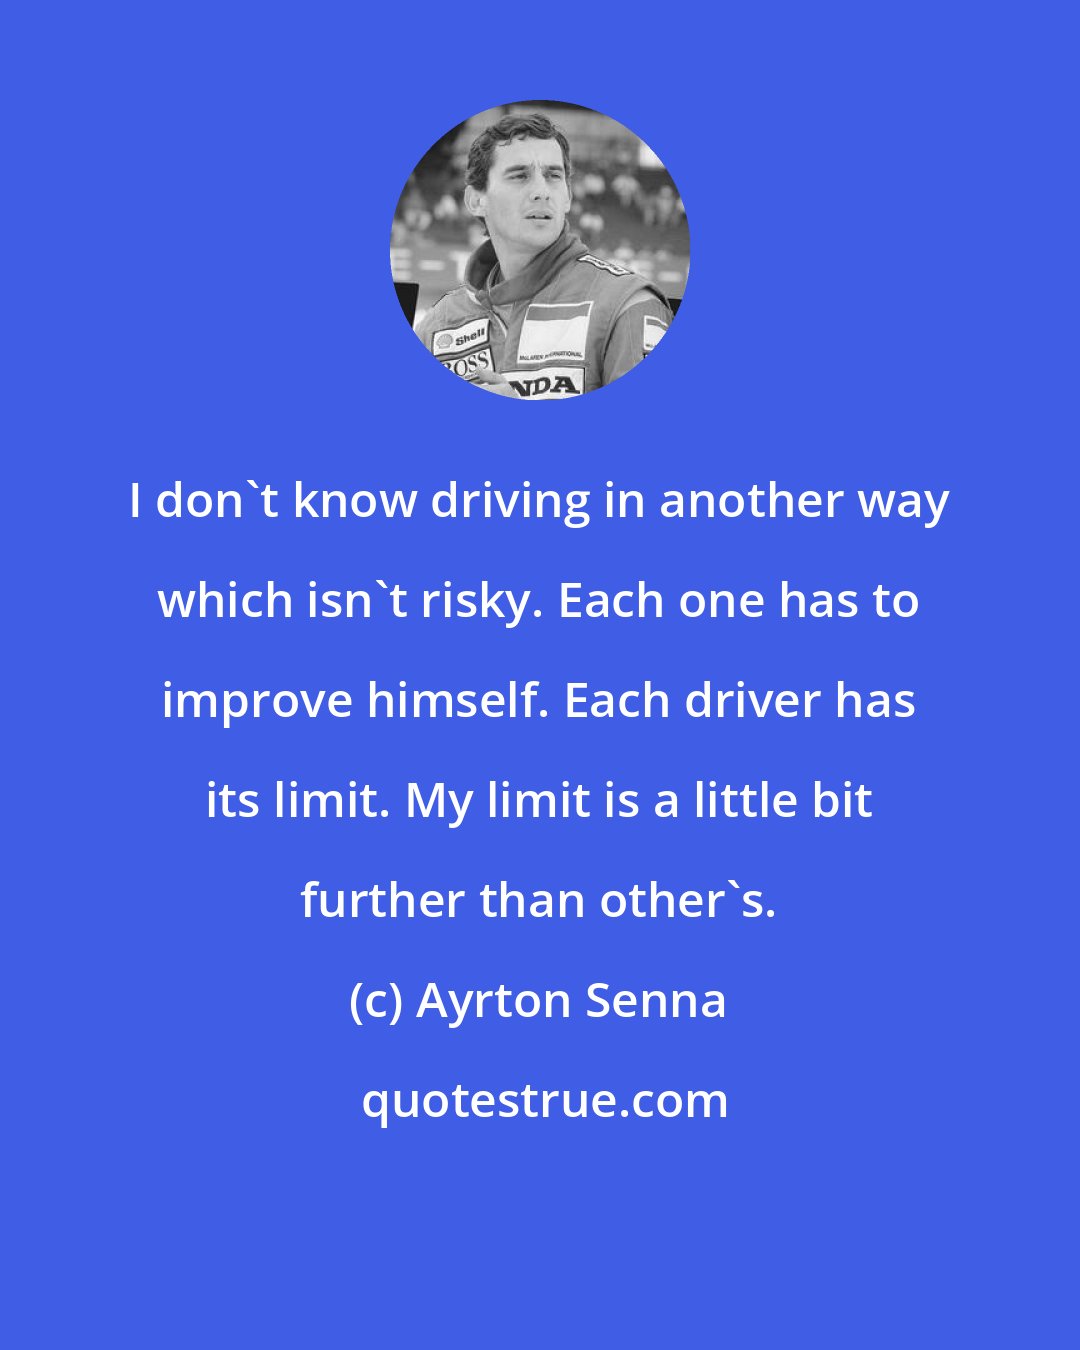 Ayrton Senna: I don't know driving in another way which isn't risky. Each one has to improve himself. Each driver has its limit. My limit is a little bit further than other's.